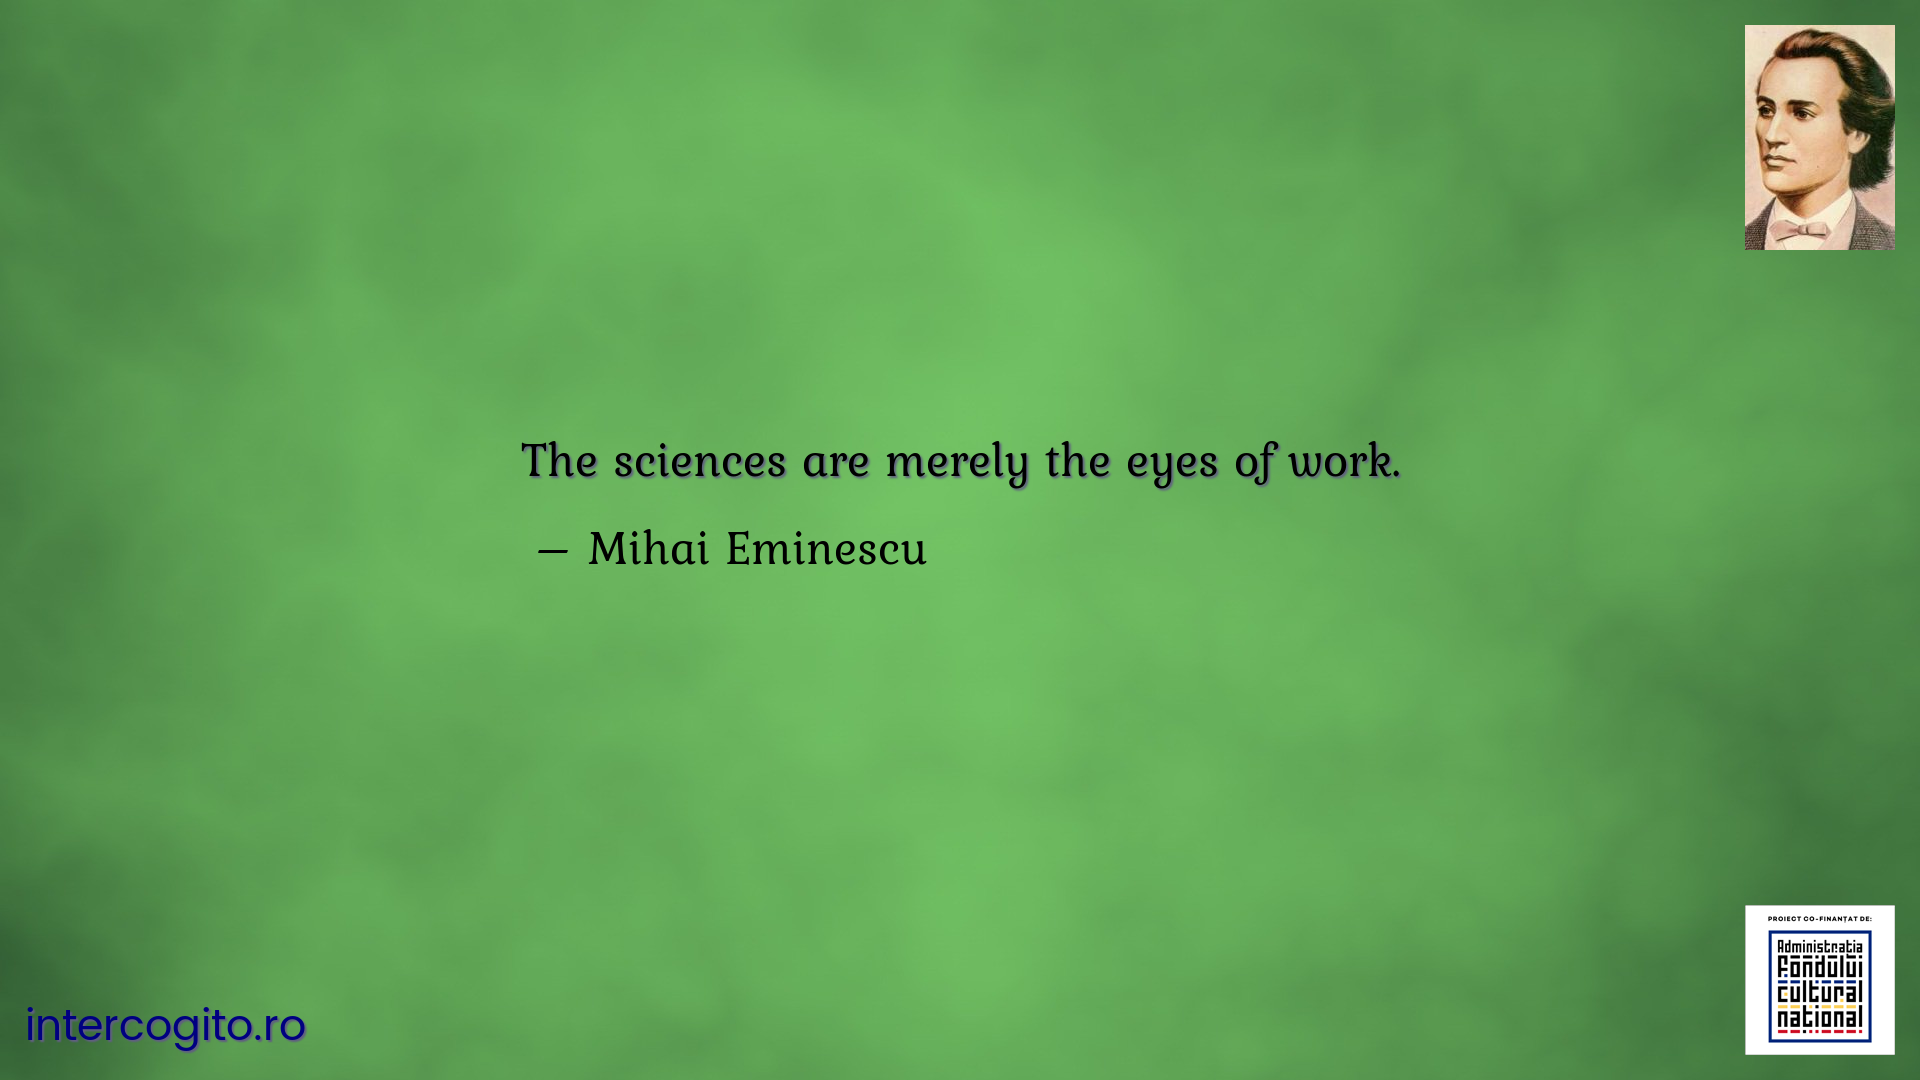 The sciences are merely the eyes of work.